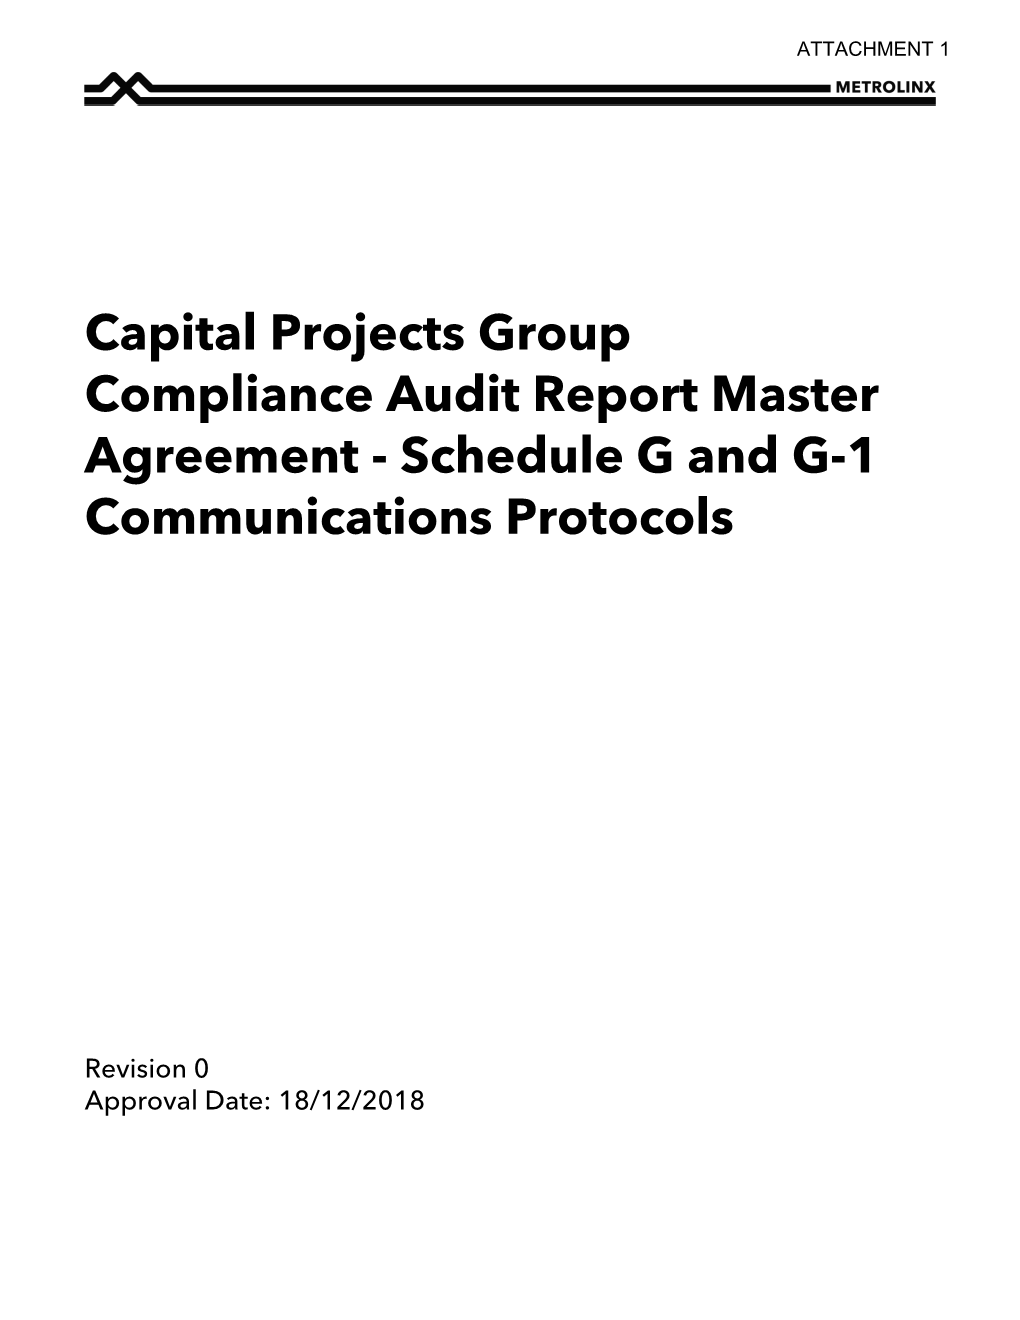 Capital Projects Group Compliance Audit Report Master Agreement - Schedule G and G-1 Communications Protocols